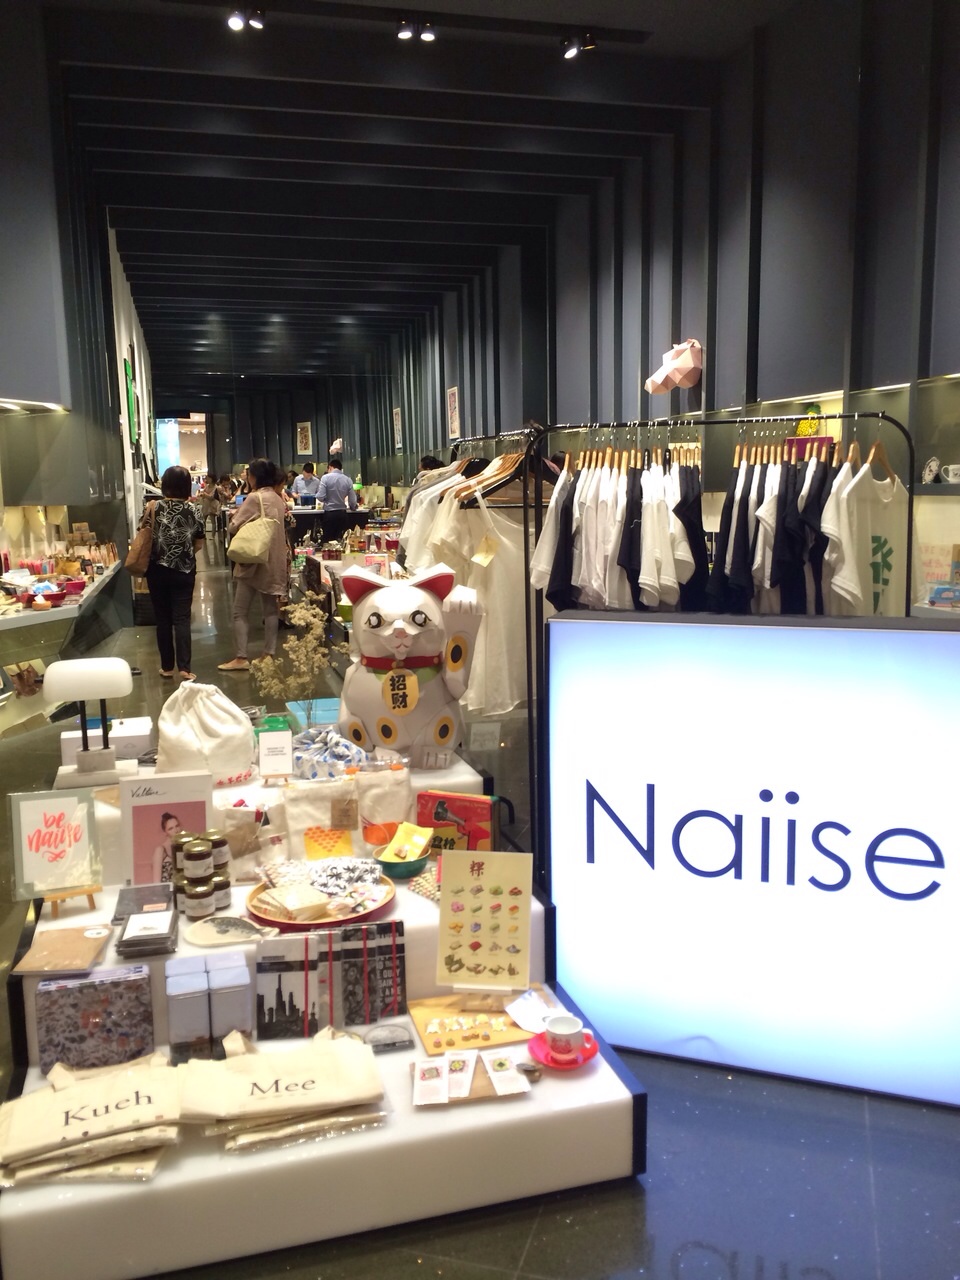 Naiise Westgate - the place to be!